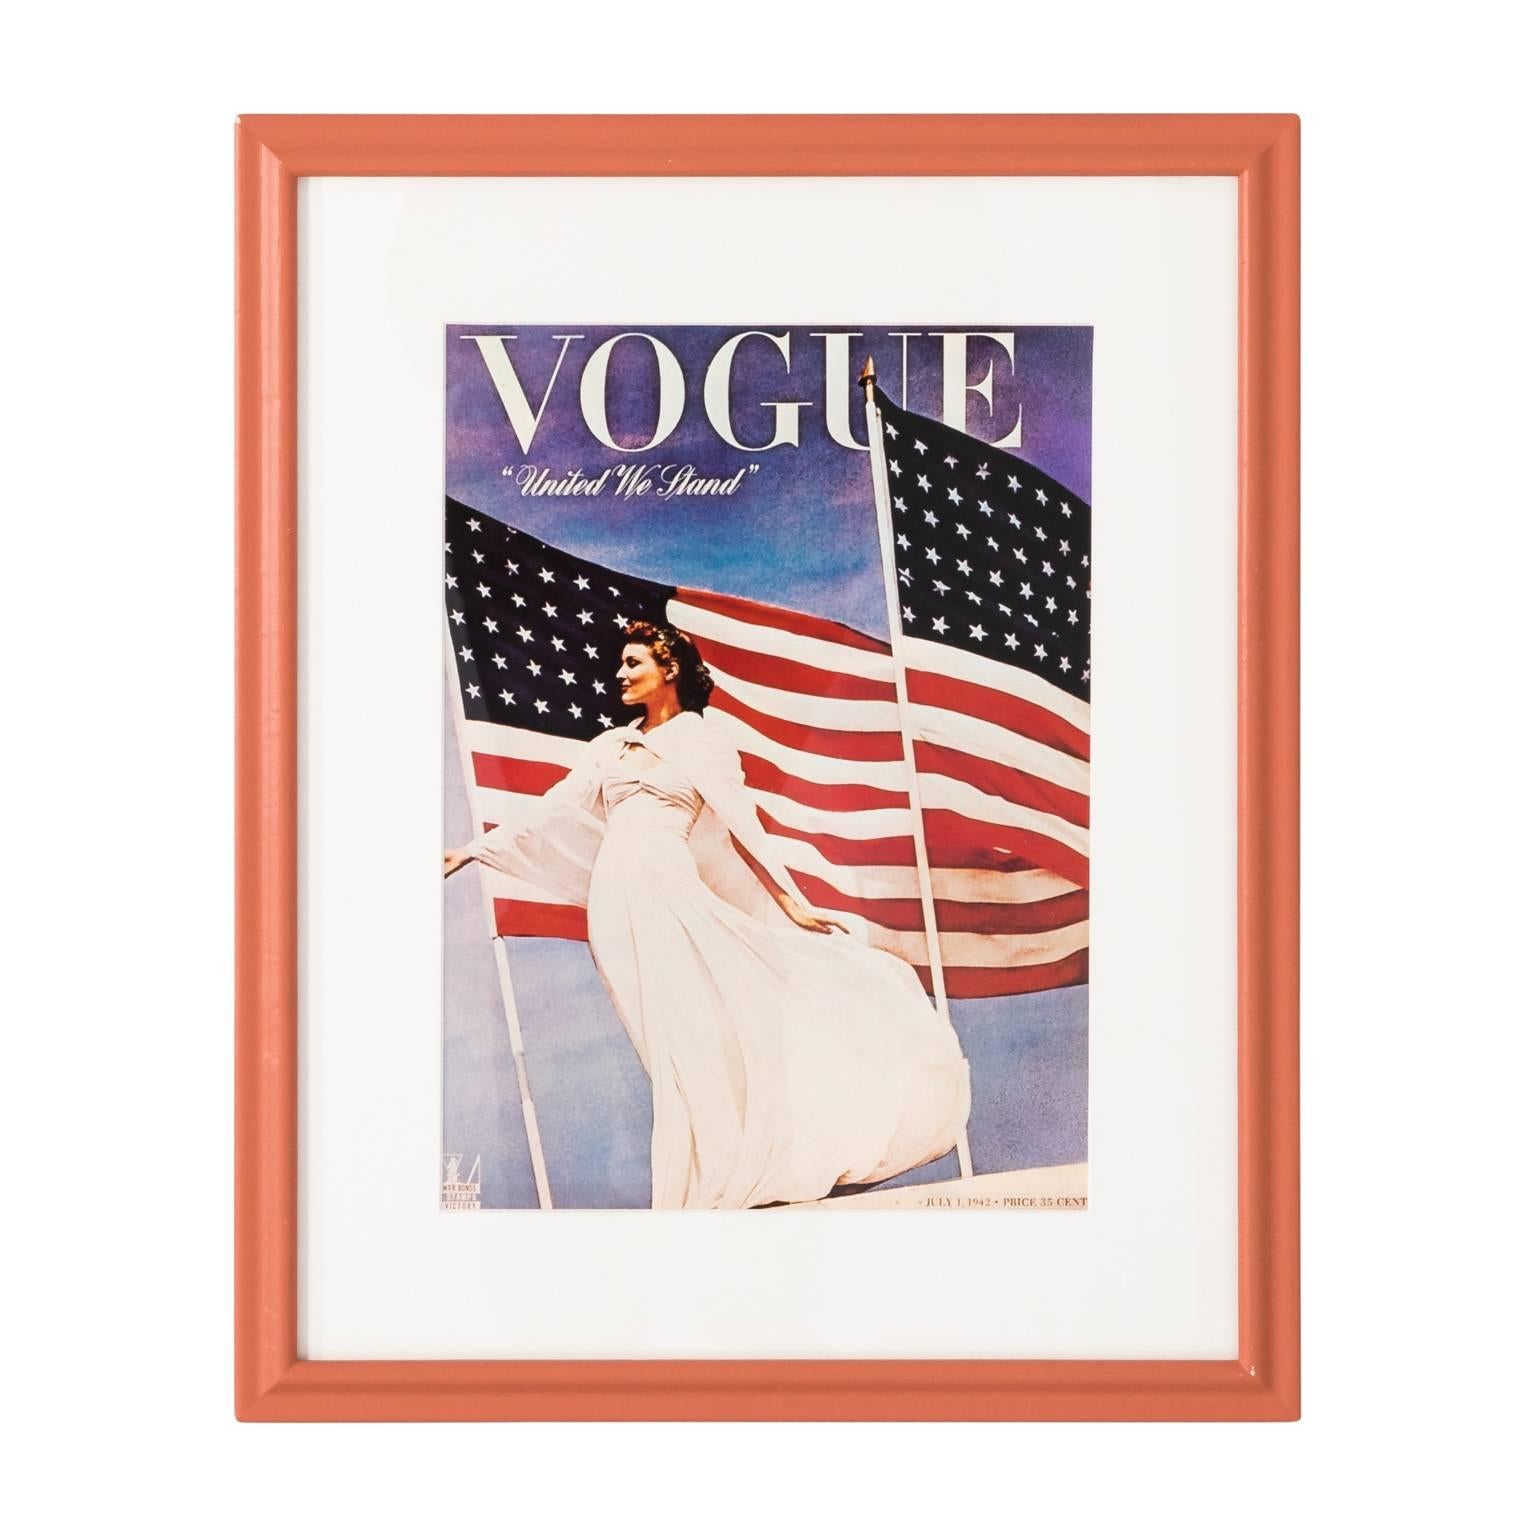 Original vogue covers in custom frames and matting, circa 1930-1950. Can be purchased separately $450 each.